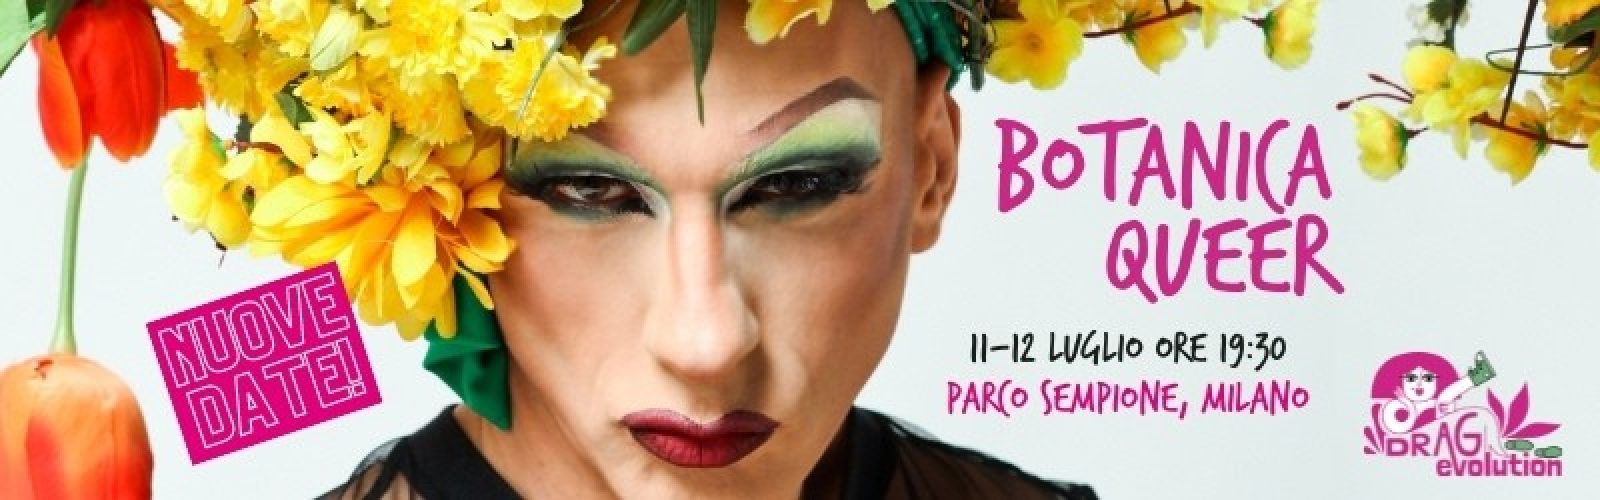 BOTANICA QUEER NUOVE DATE per homepage sito